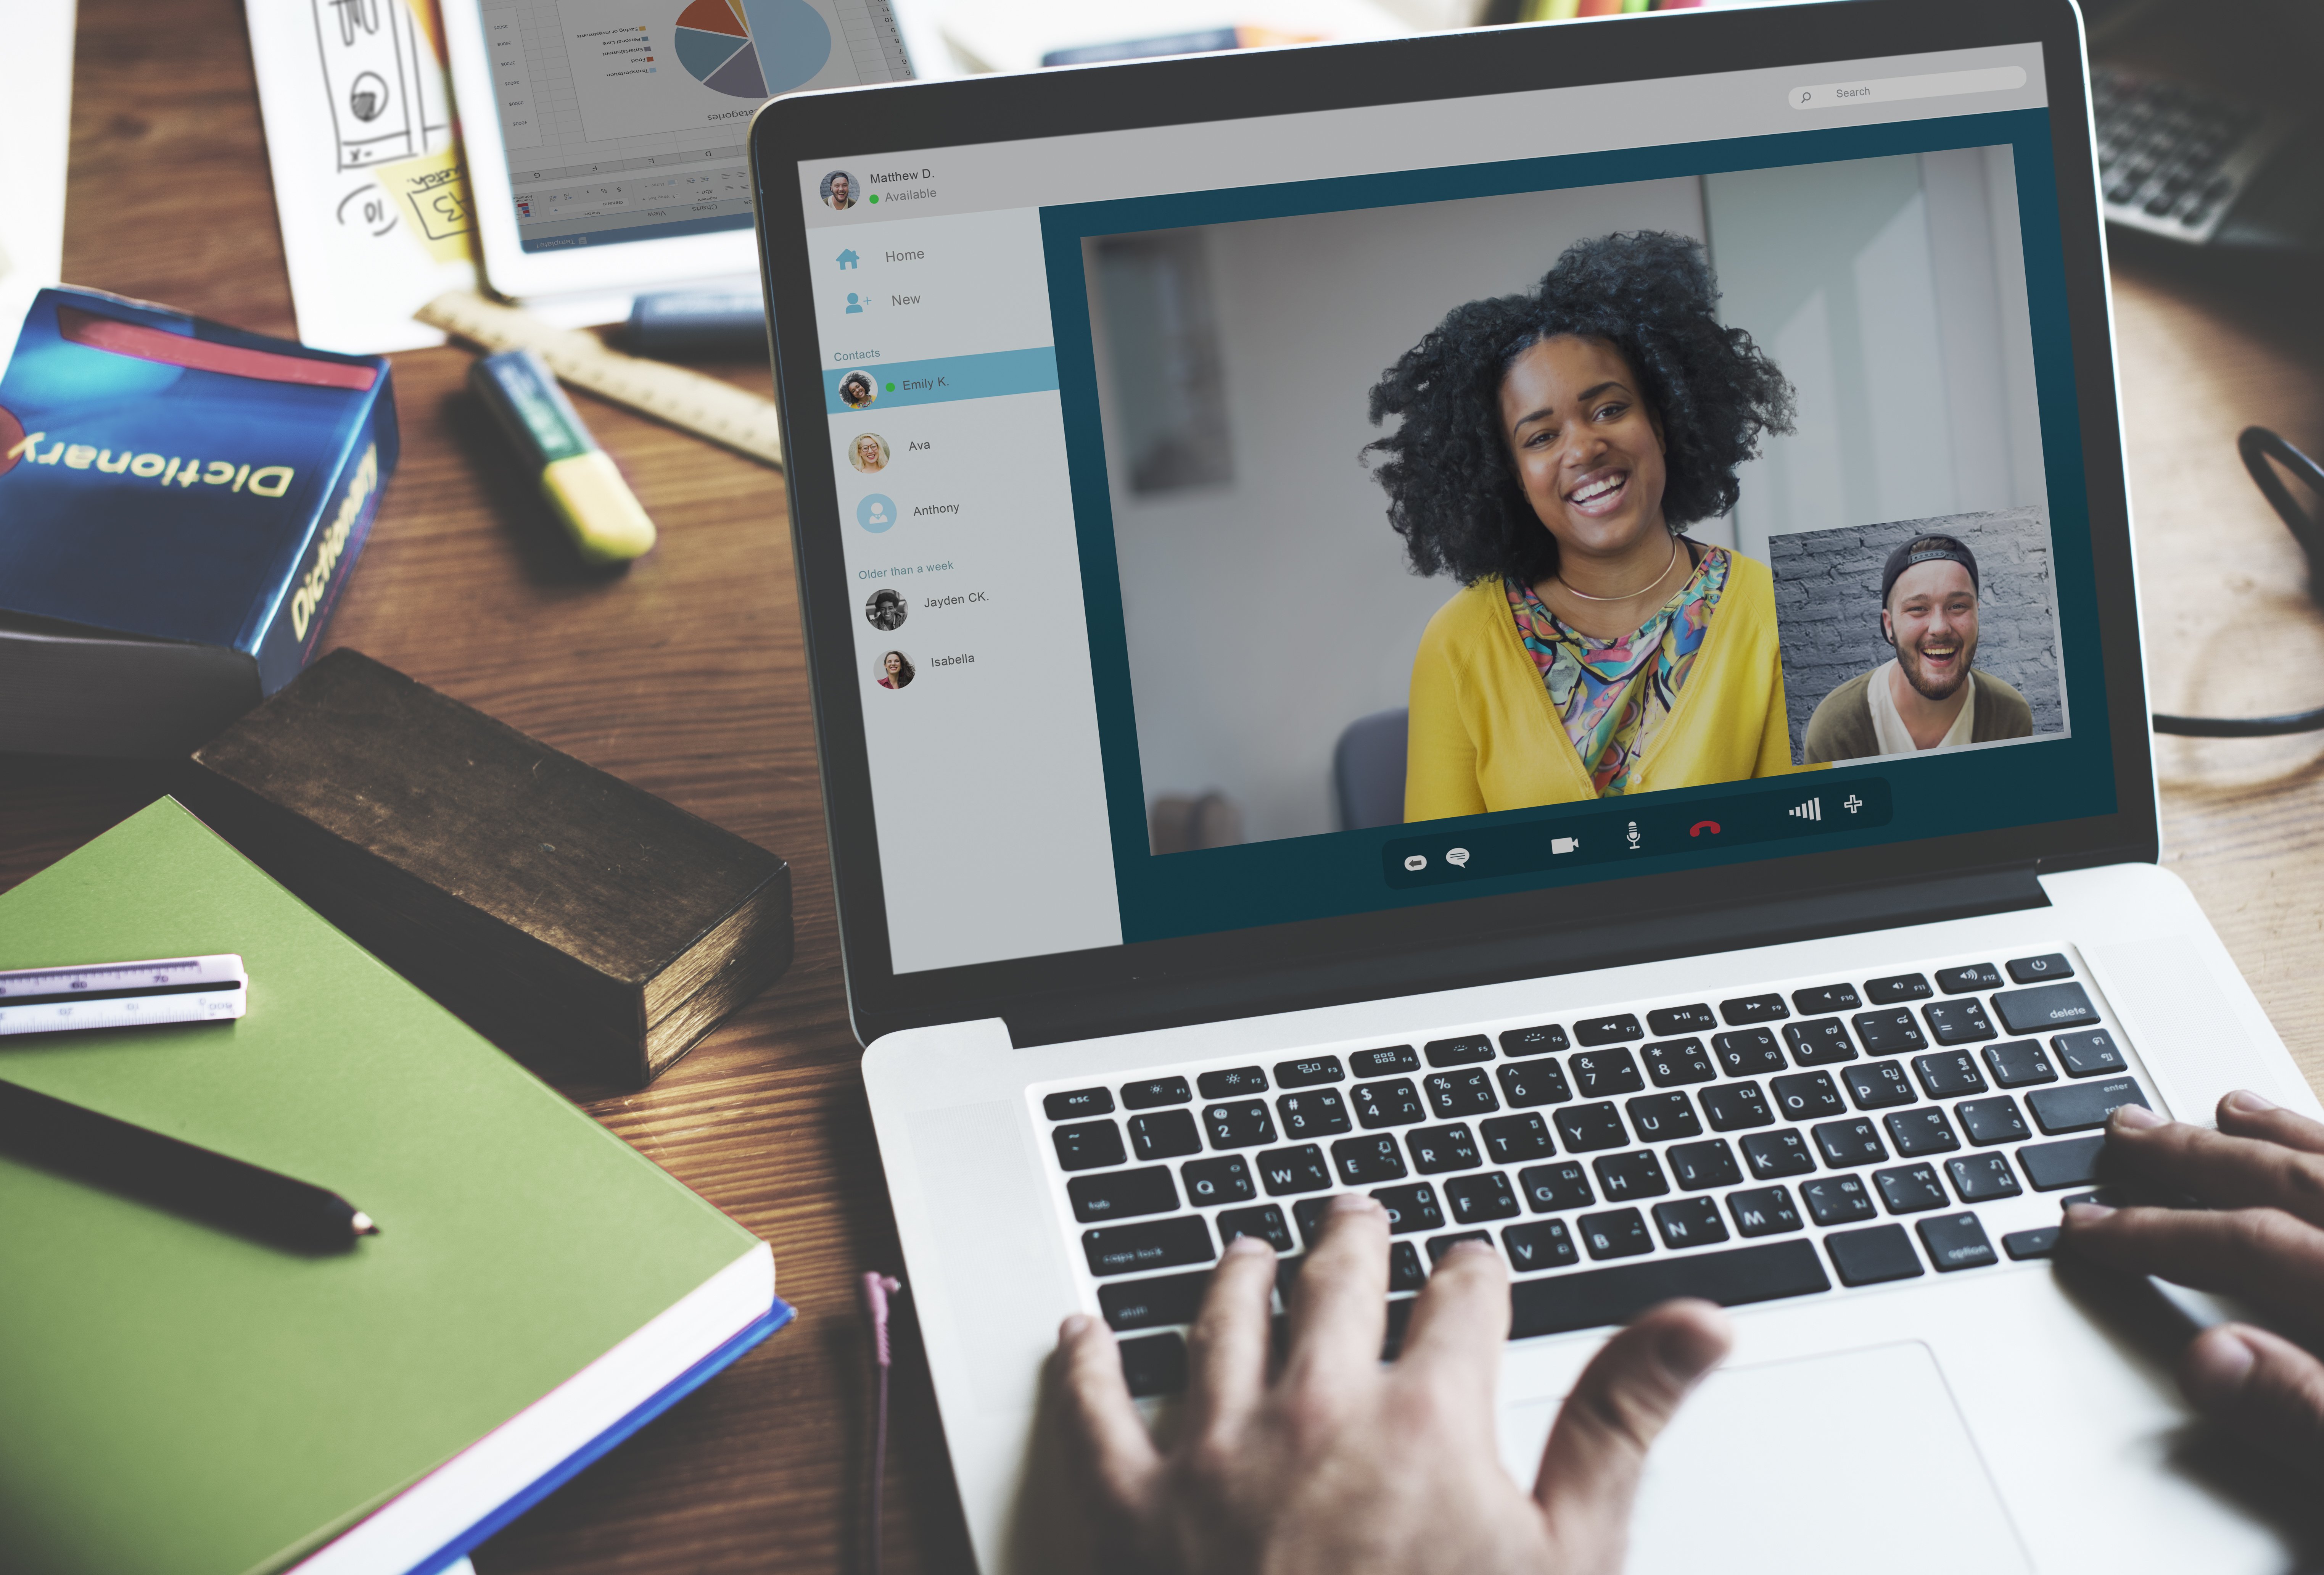 Remote worker video conferencing